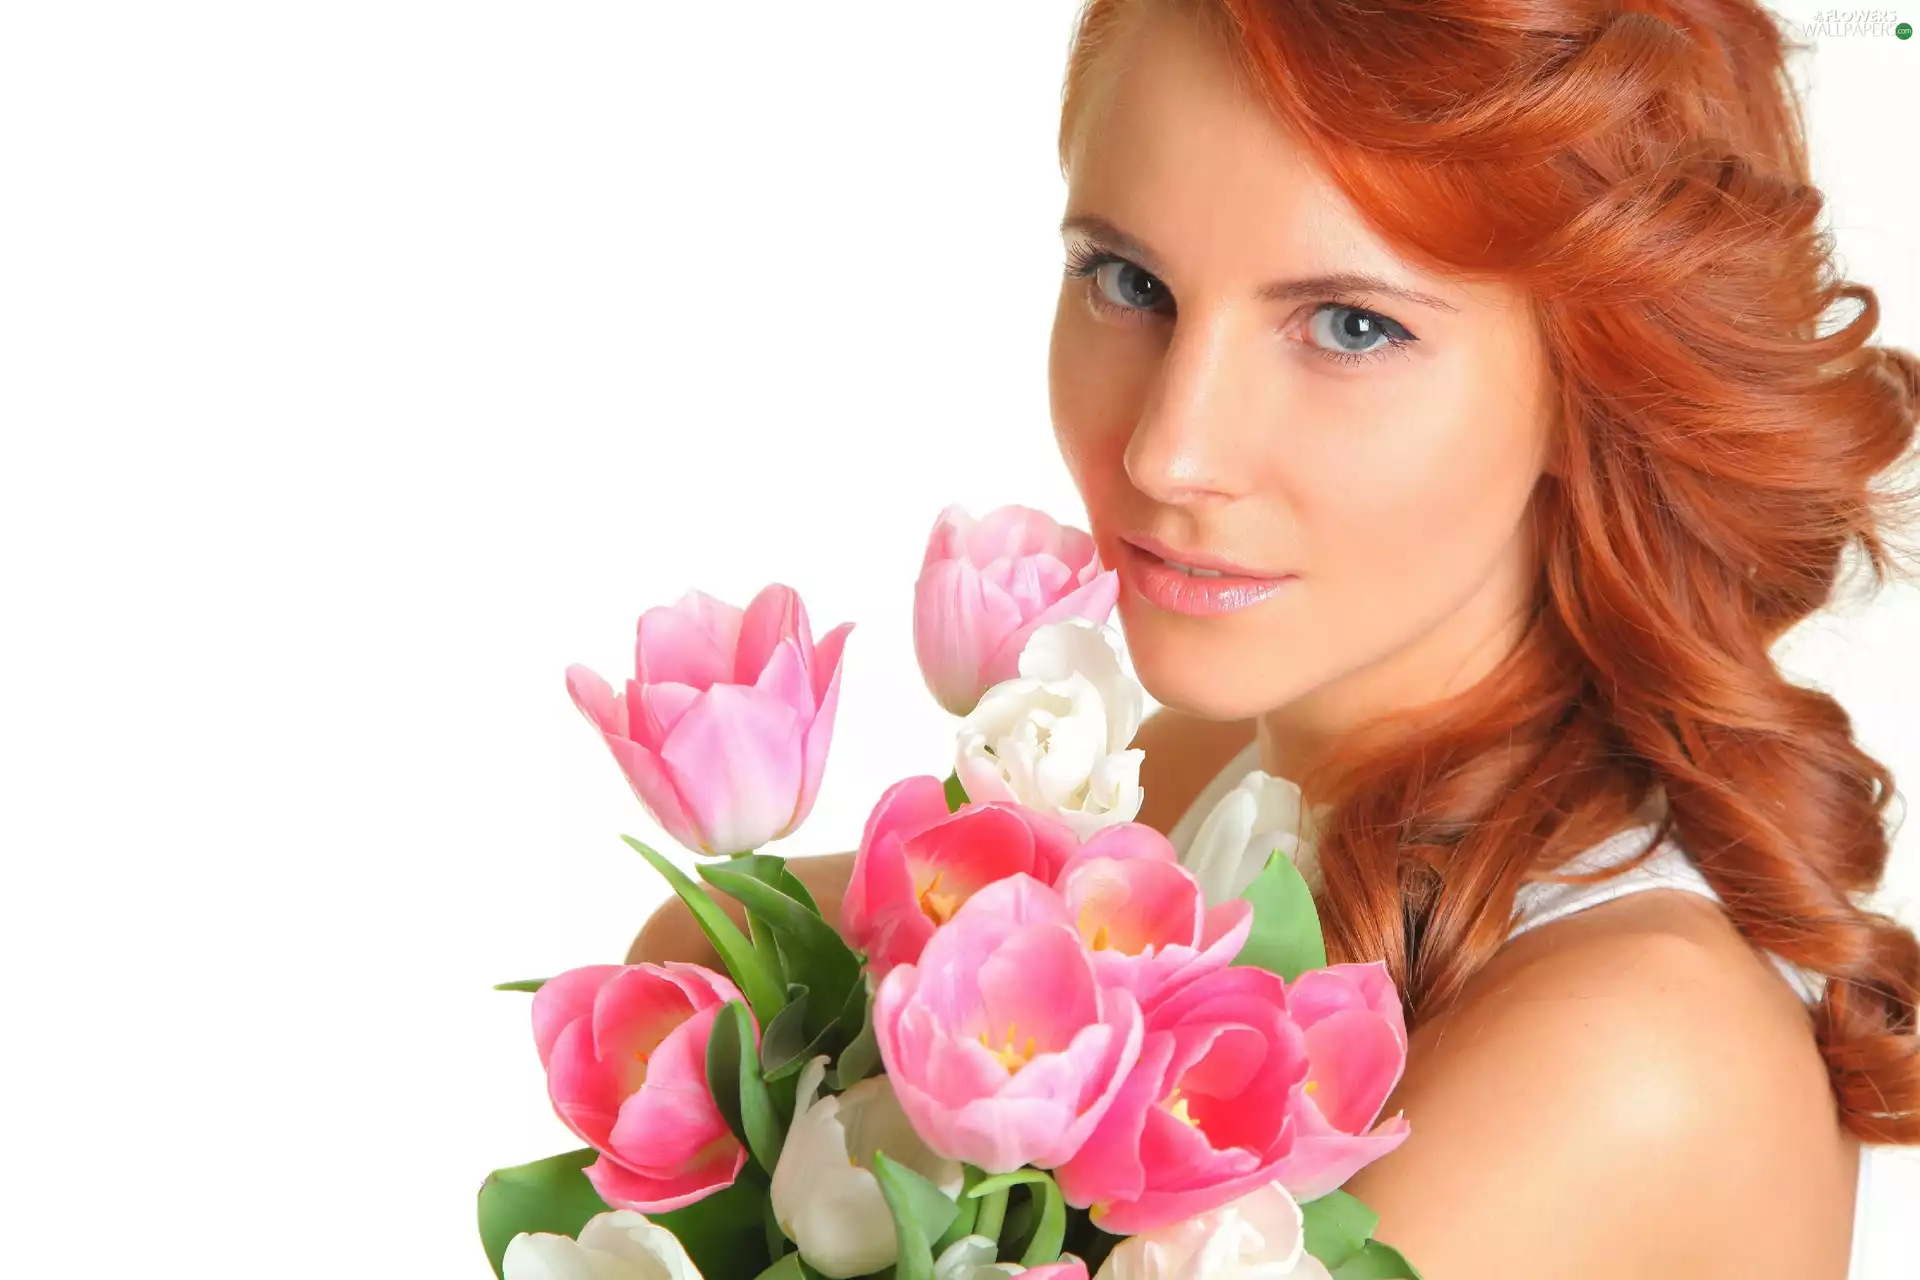 bouquet, tulips, girl, make-up, redhead